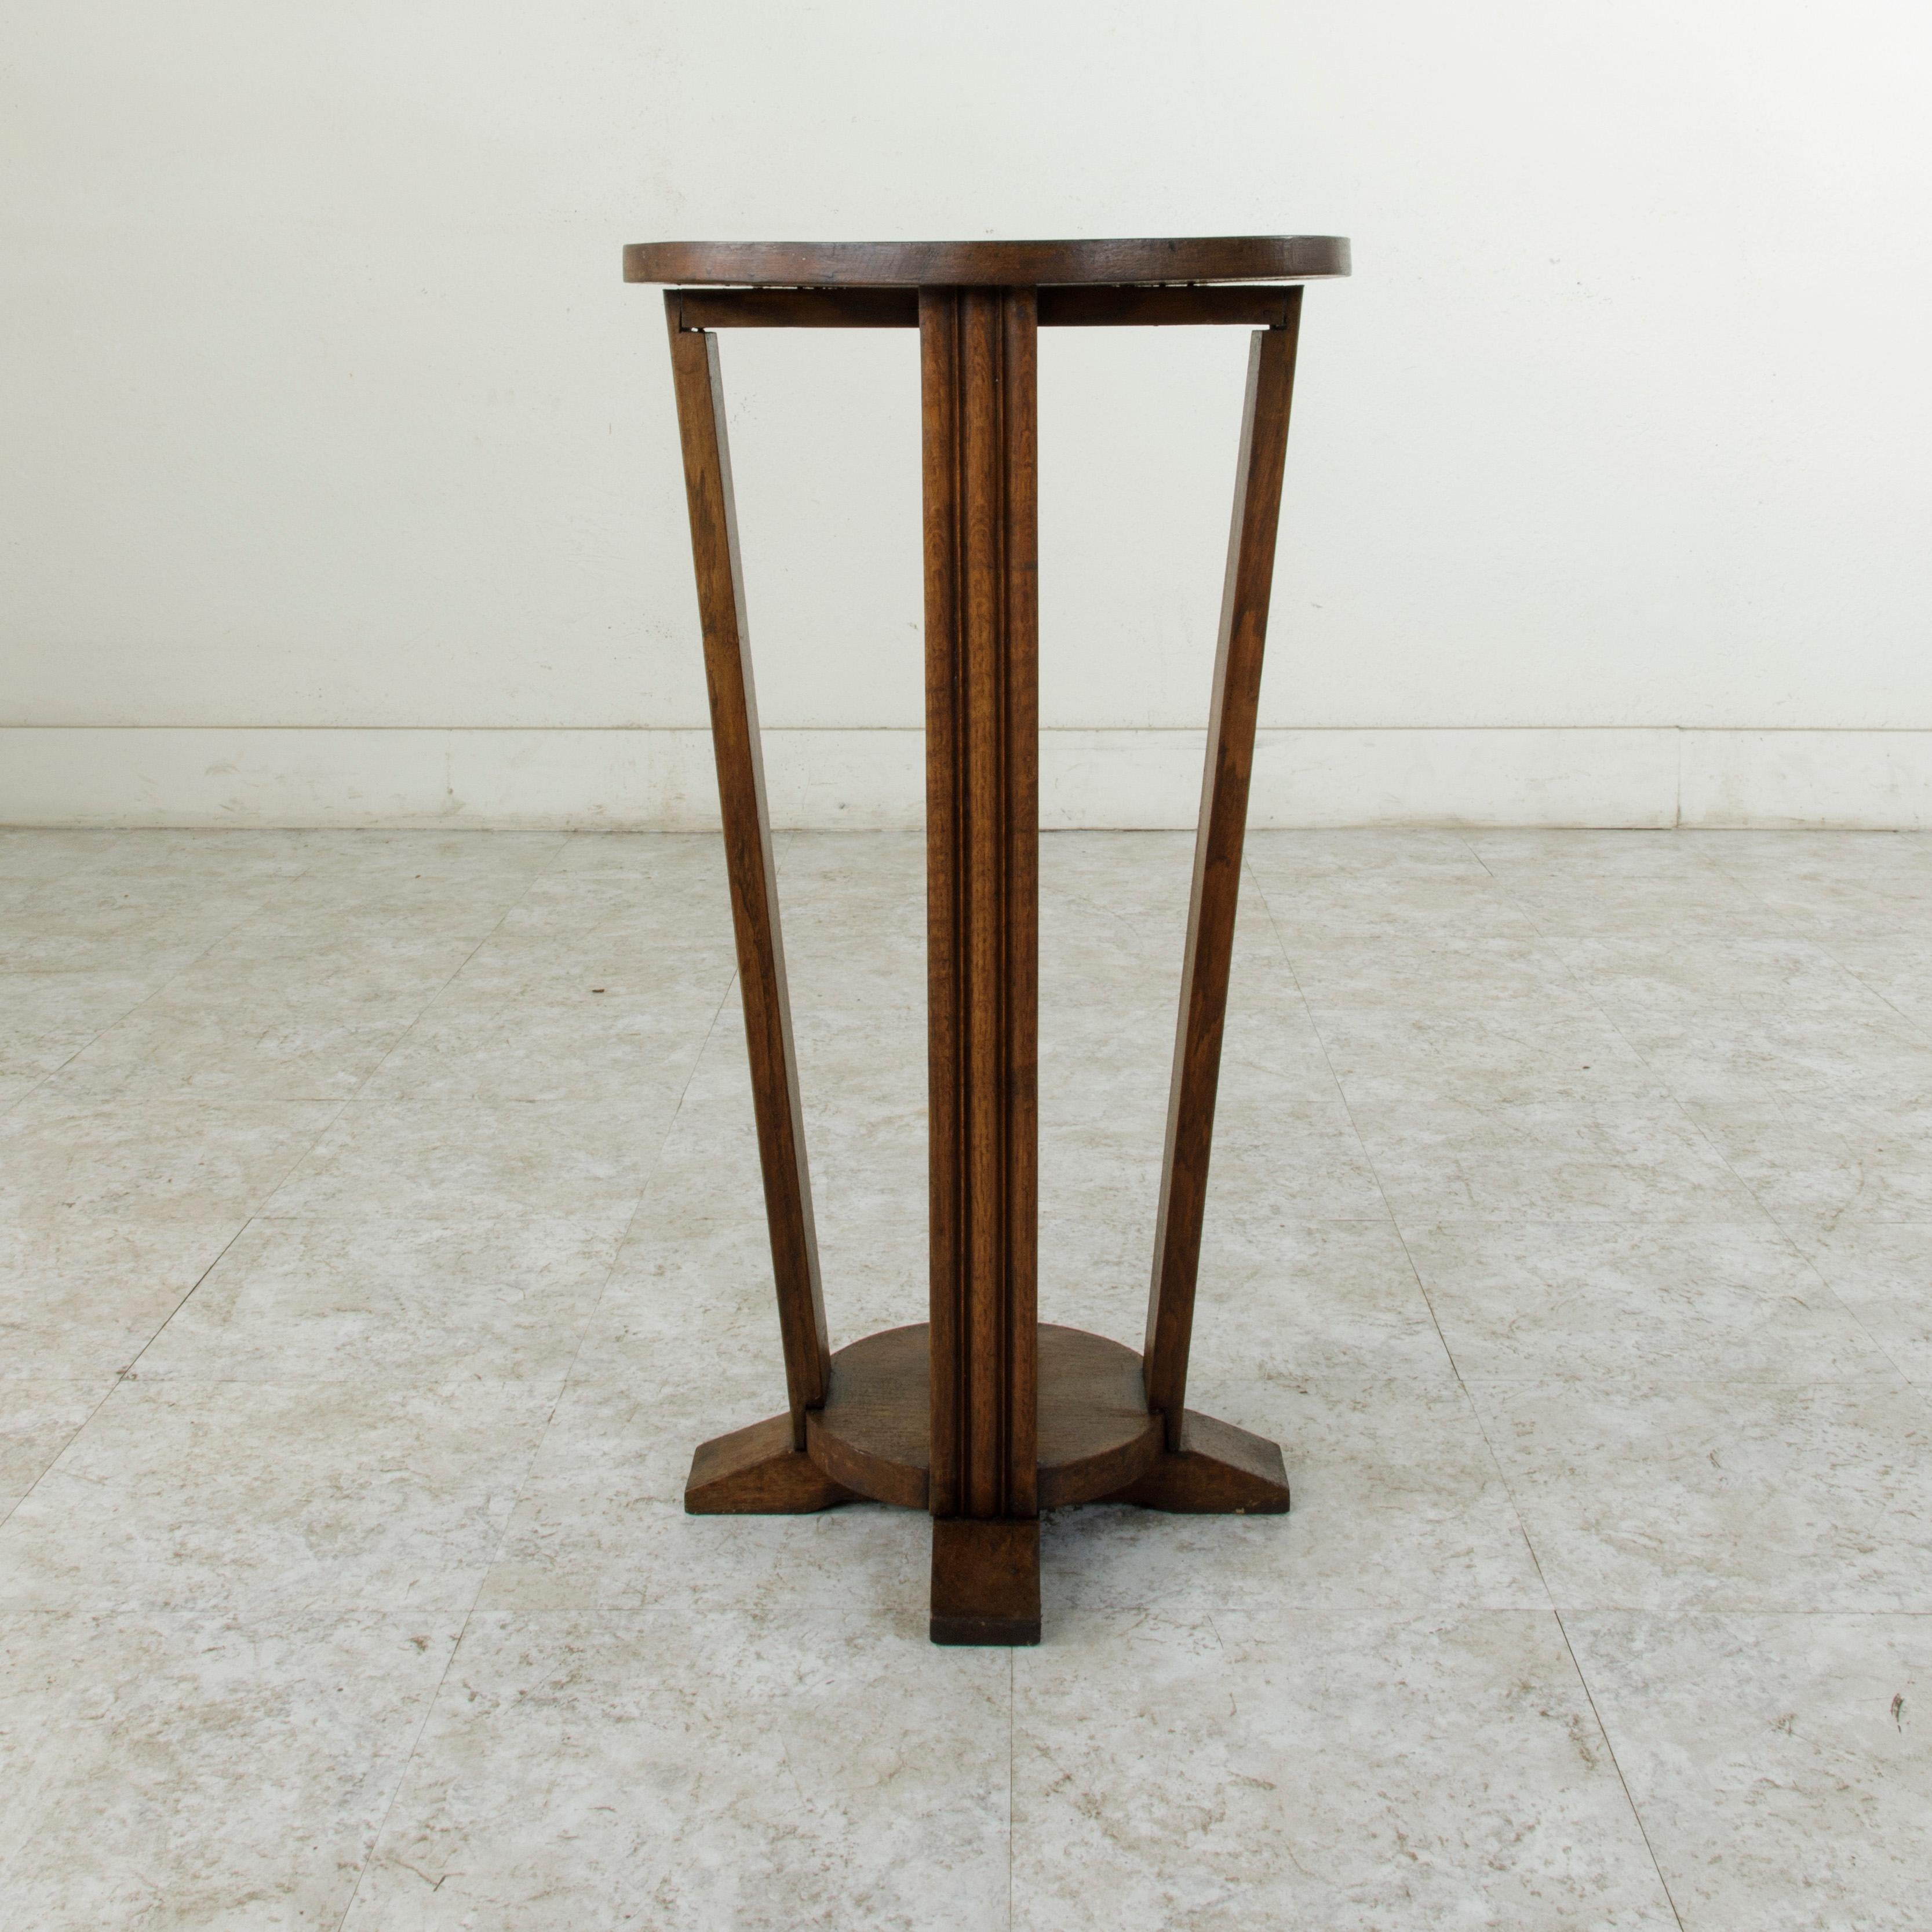 This early twentieth century French Art Deco period pedestal or side table is constructed of solid oak and features a 17 inch diameter top. The top is supported by four fluted legs that join a lower base. Its lower level provides additional display